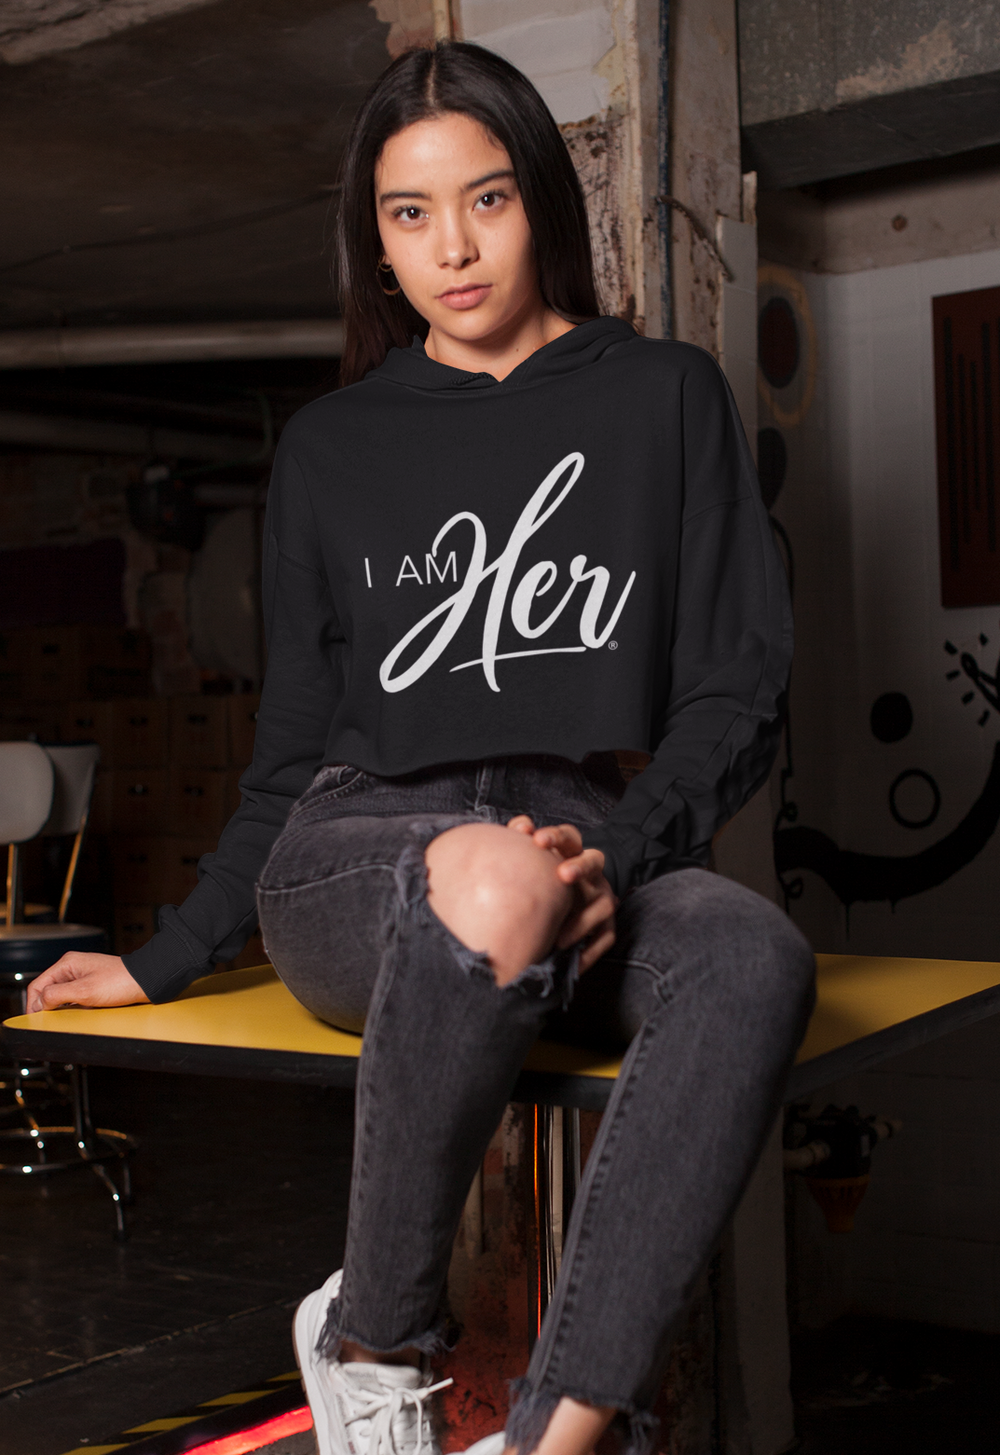 I AM HER Signature Cropped Fleece Hoodie - I AM HER Apparel